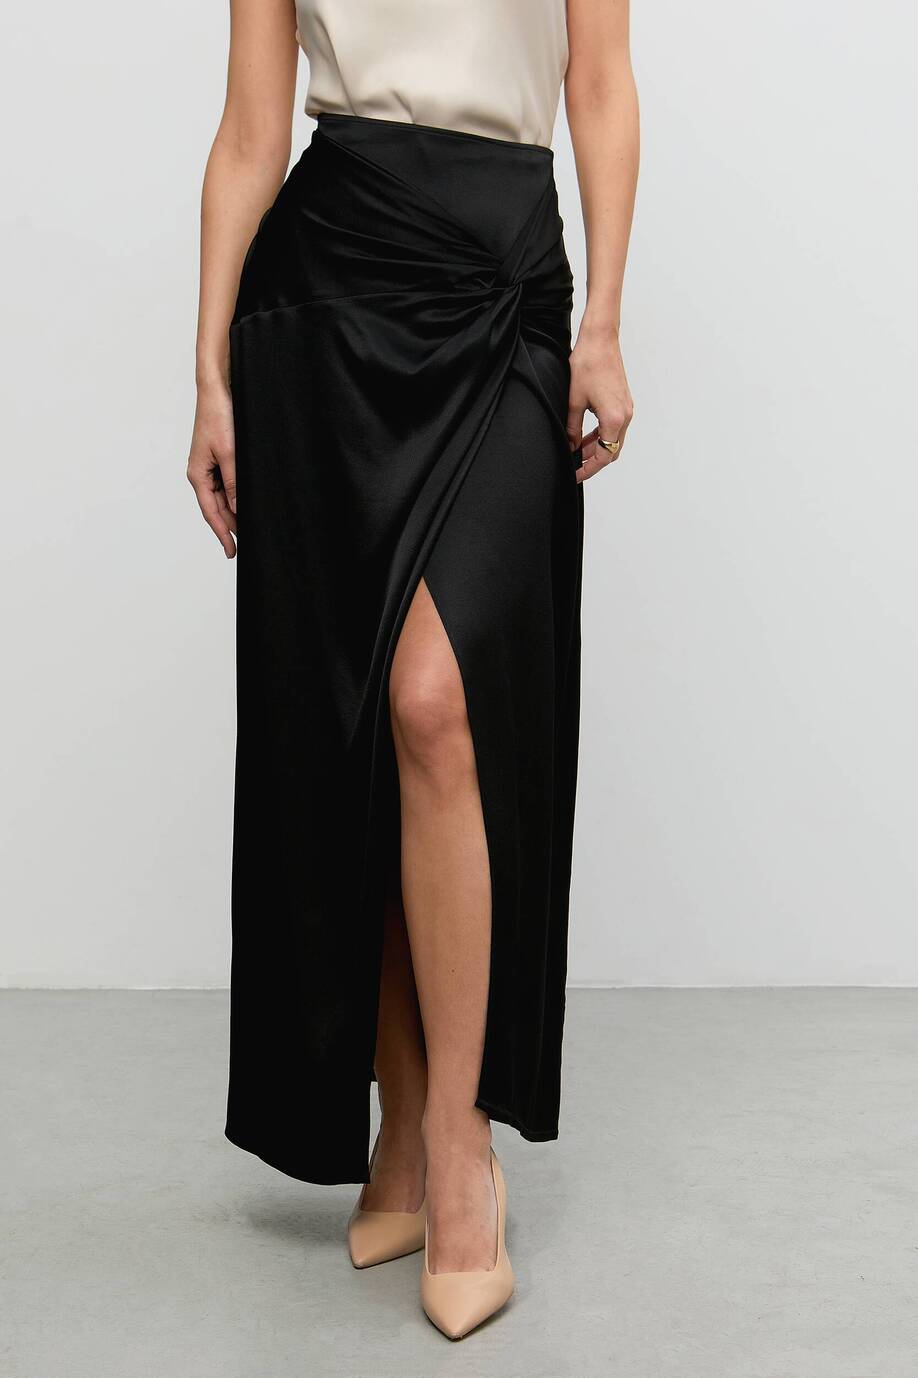 Satin skirt with a knot